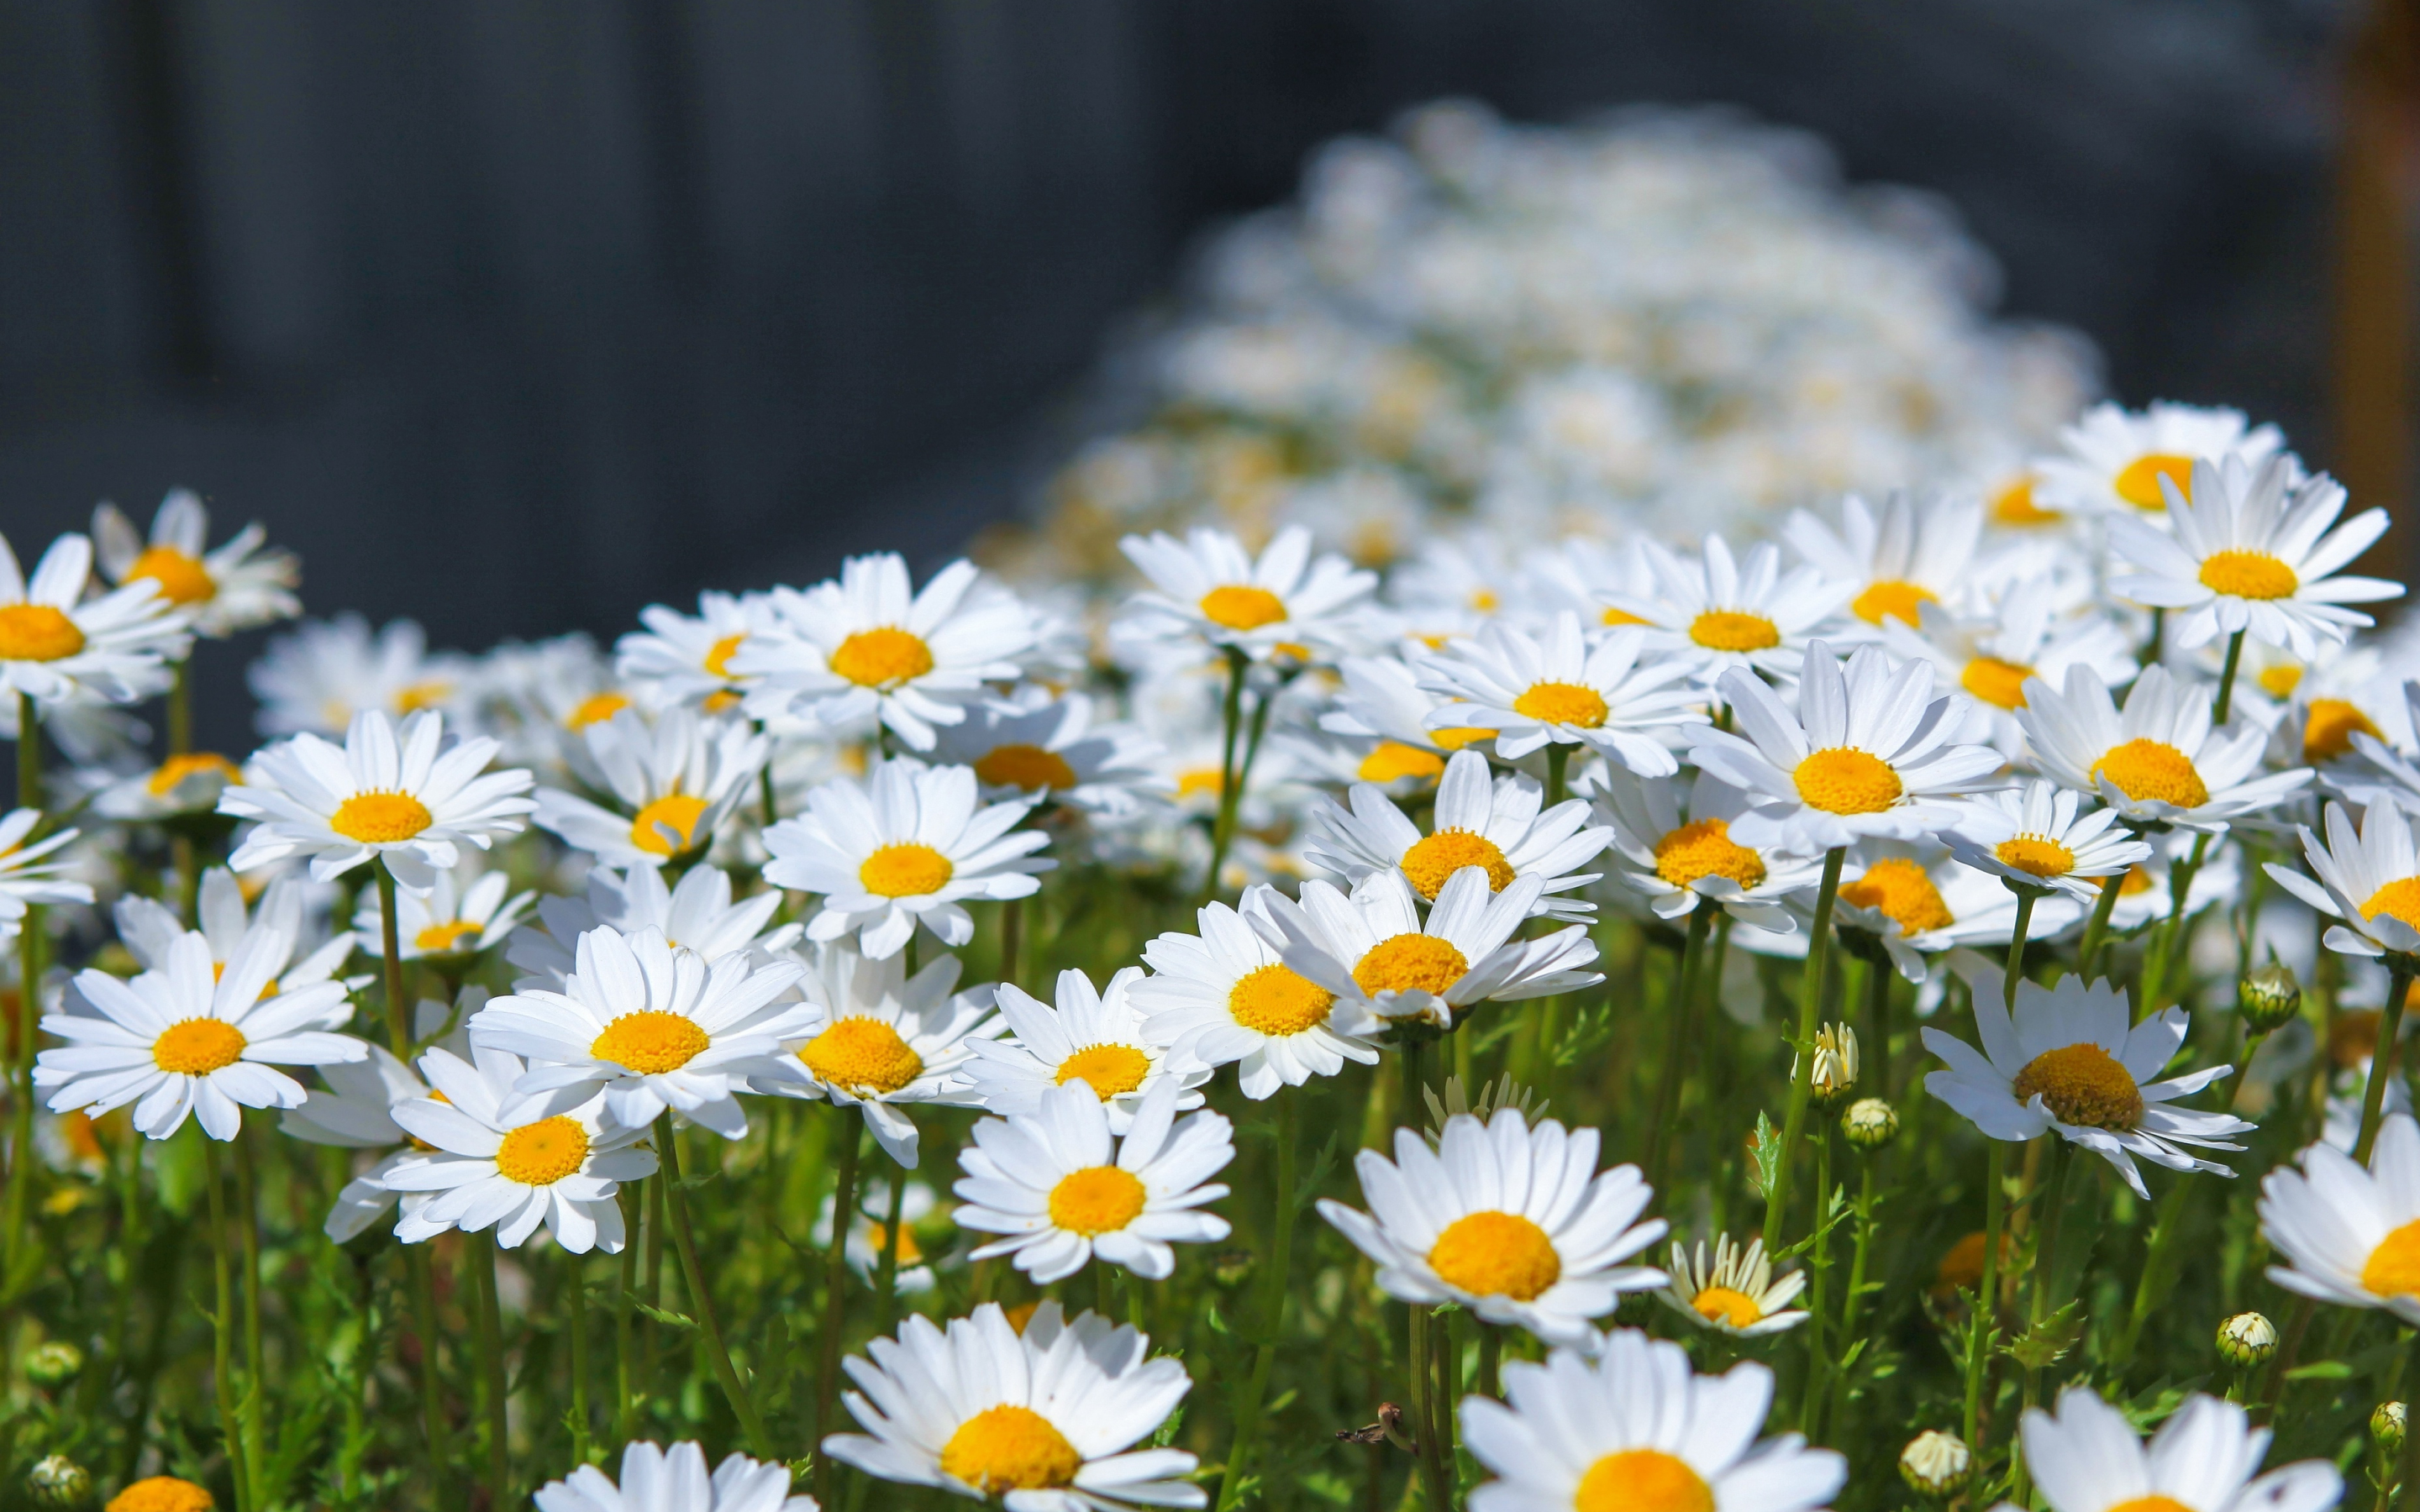 Meadow, spring, flowers, white daisy, 2880x1800 wallpaper